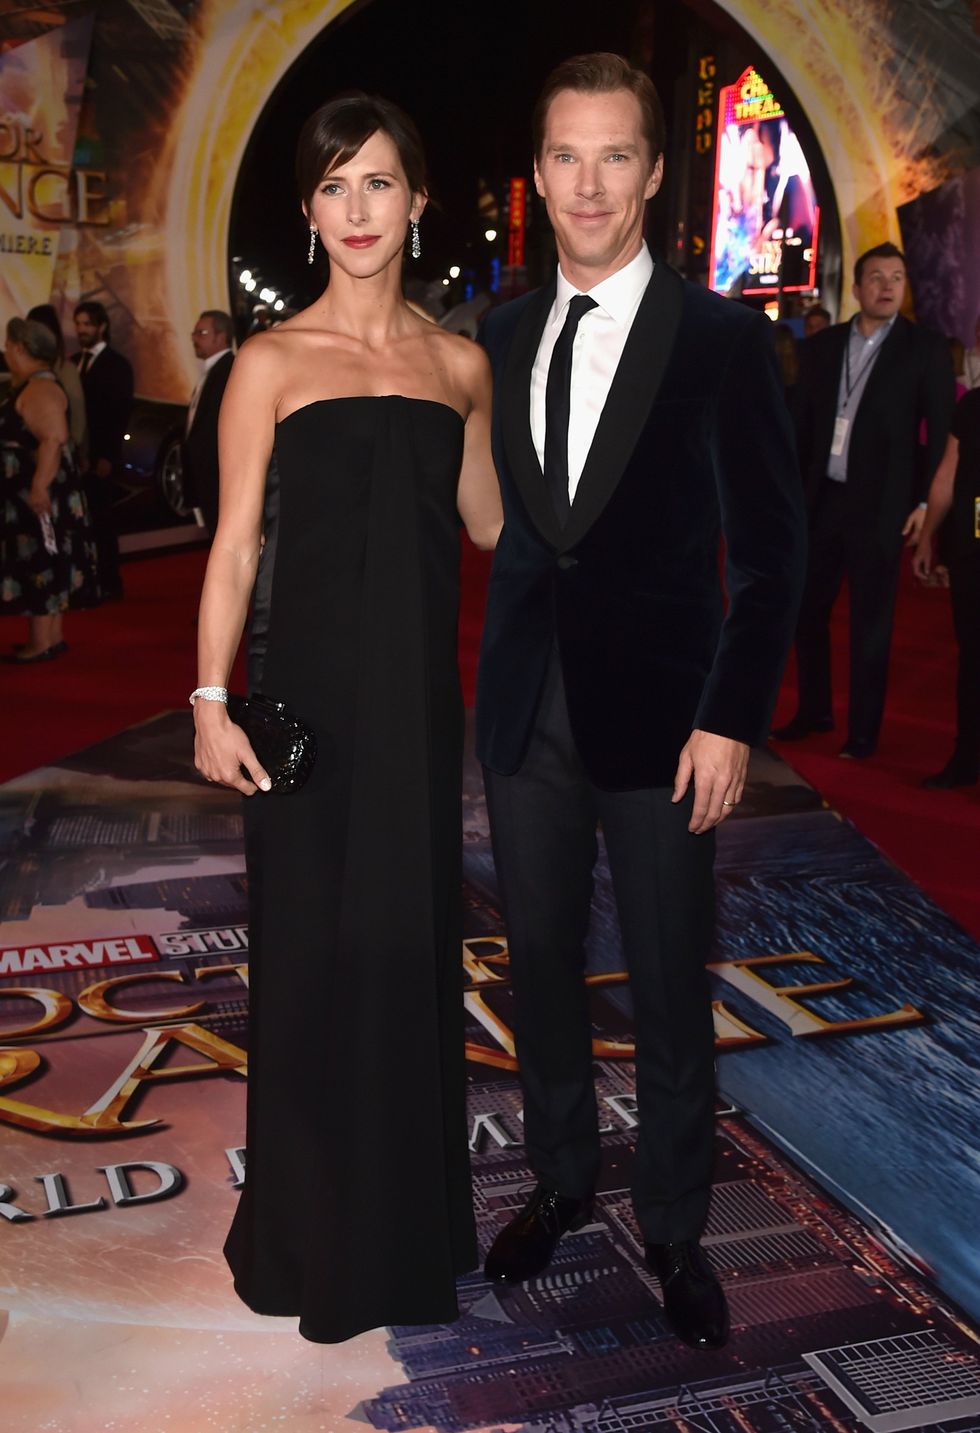 Sophie Hunter and Benedict Cumberbatch at the Dr Strange premiere